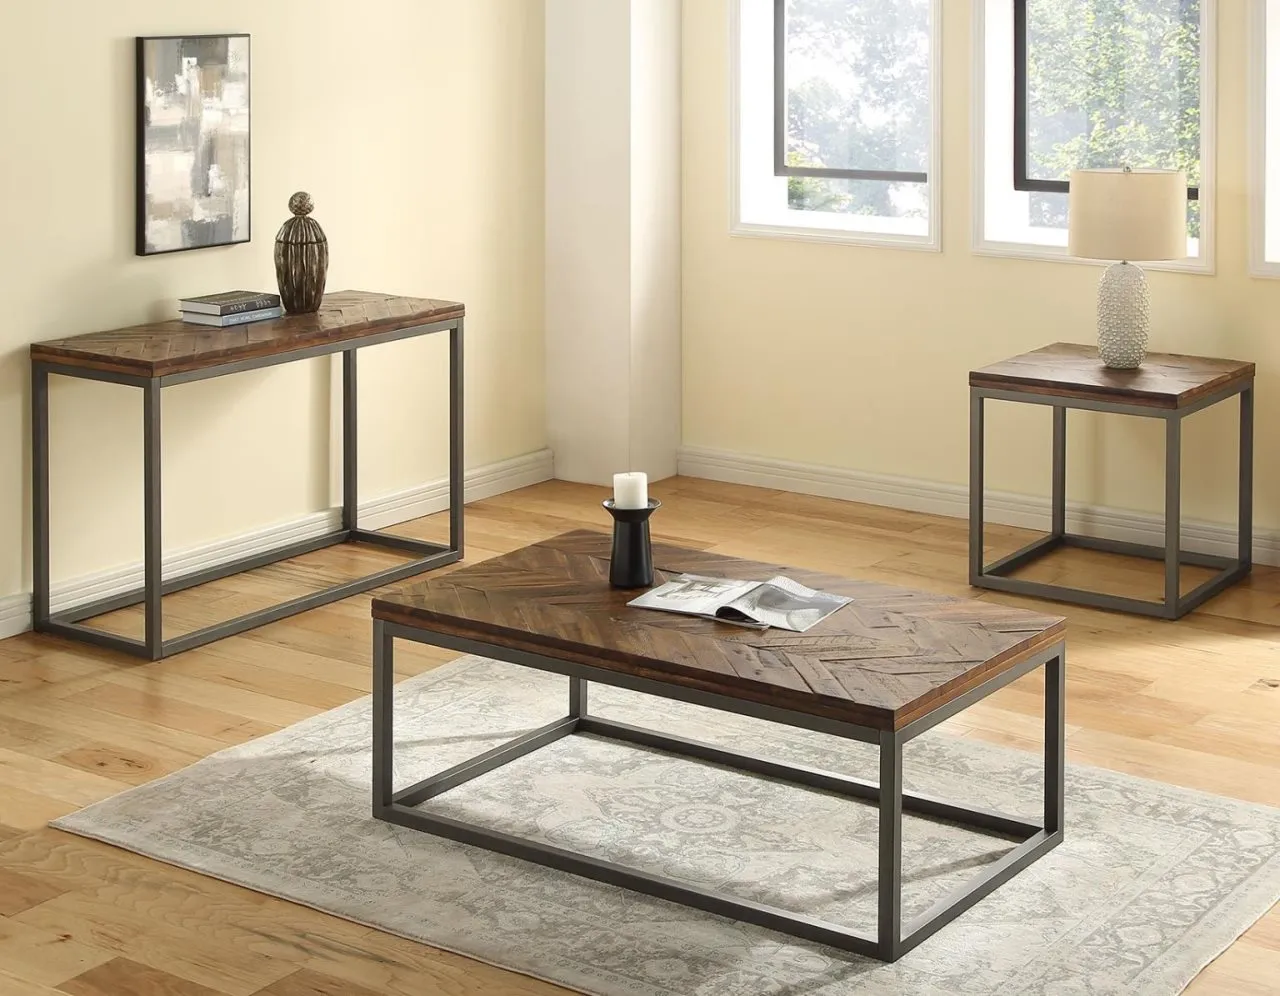 3 PIECE LORENZA COCKTAIL TABLE + 2 END TABLES